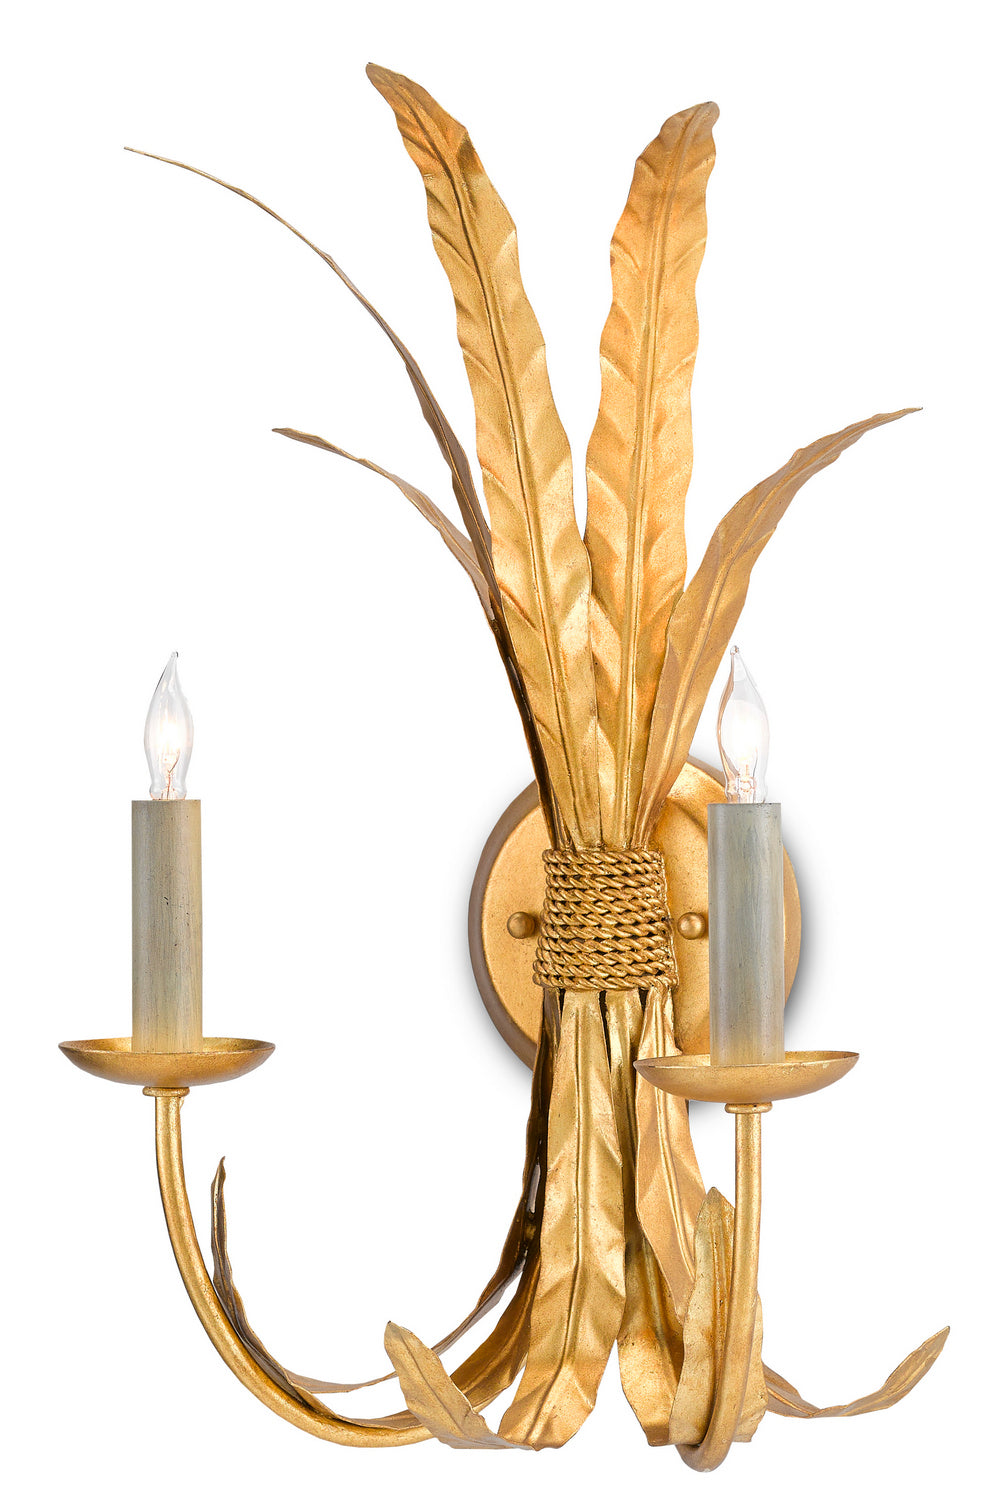 Two Light Wall Sconce from the Bunny Williams collection in Grecian Gold Leaf finish